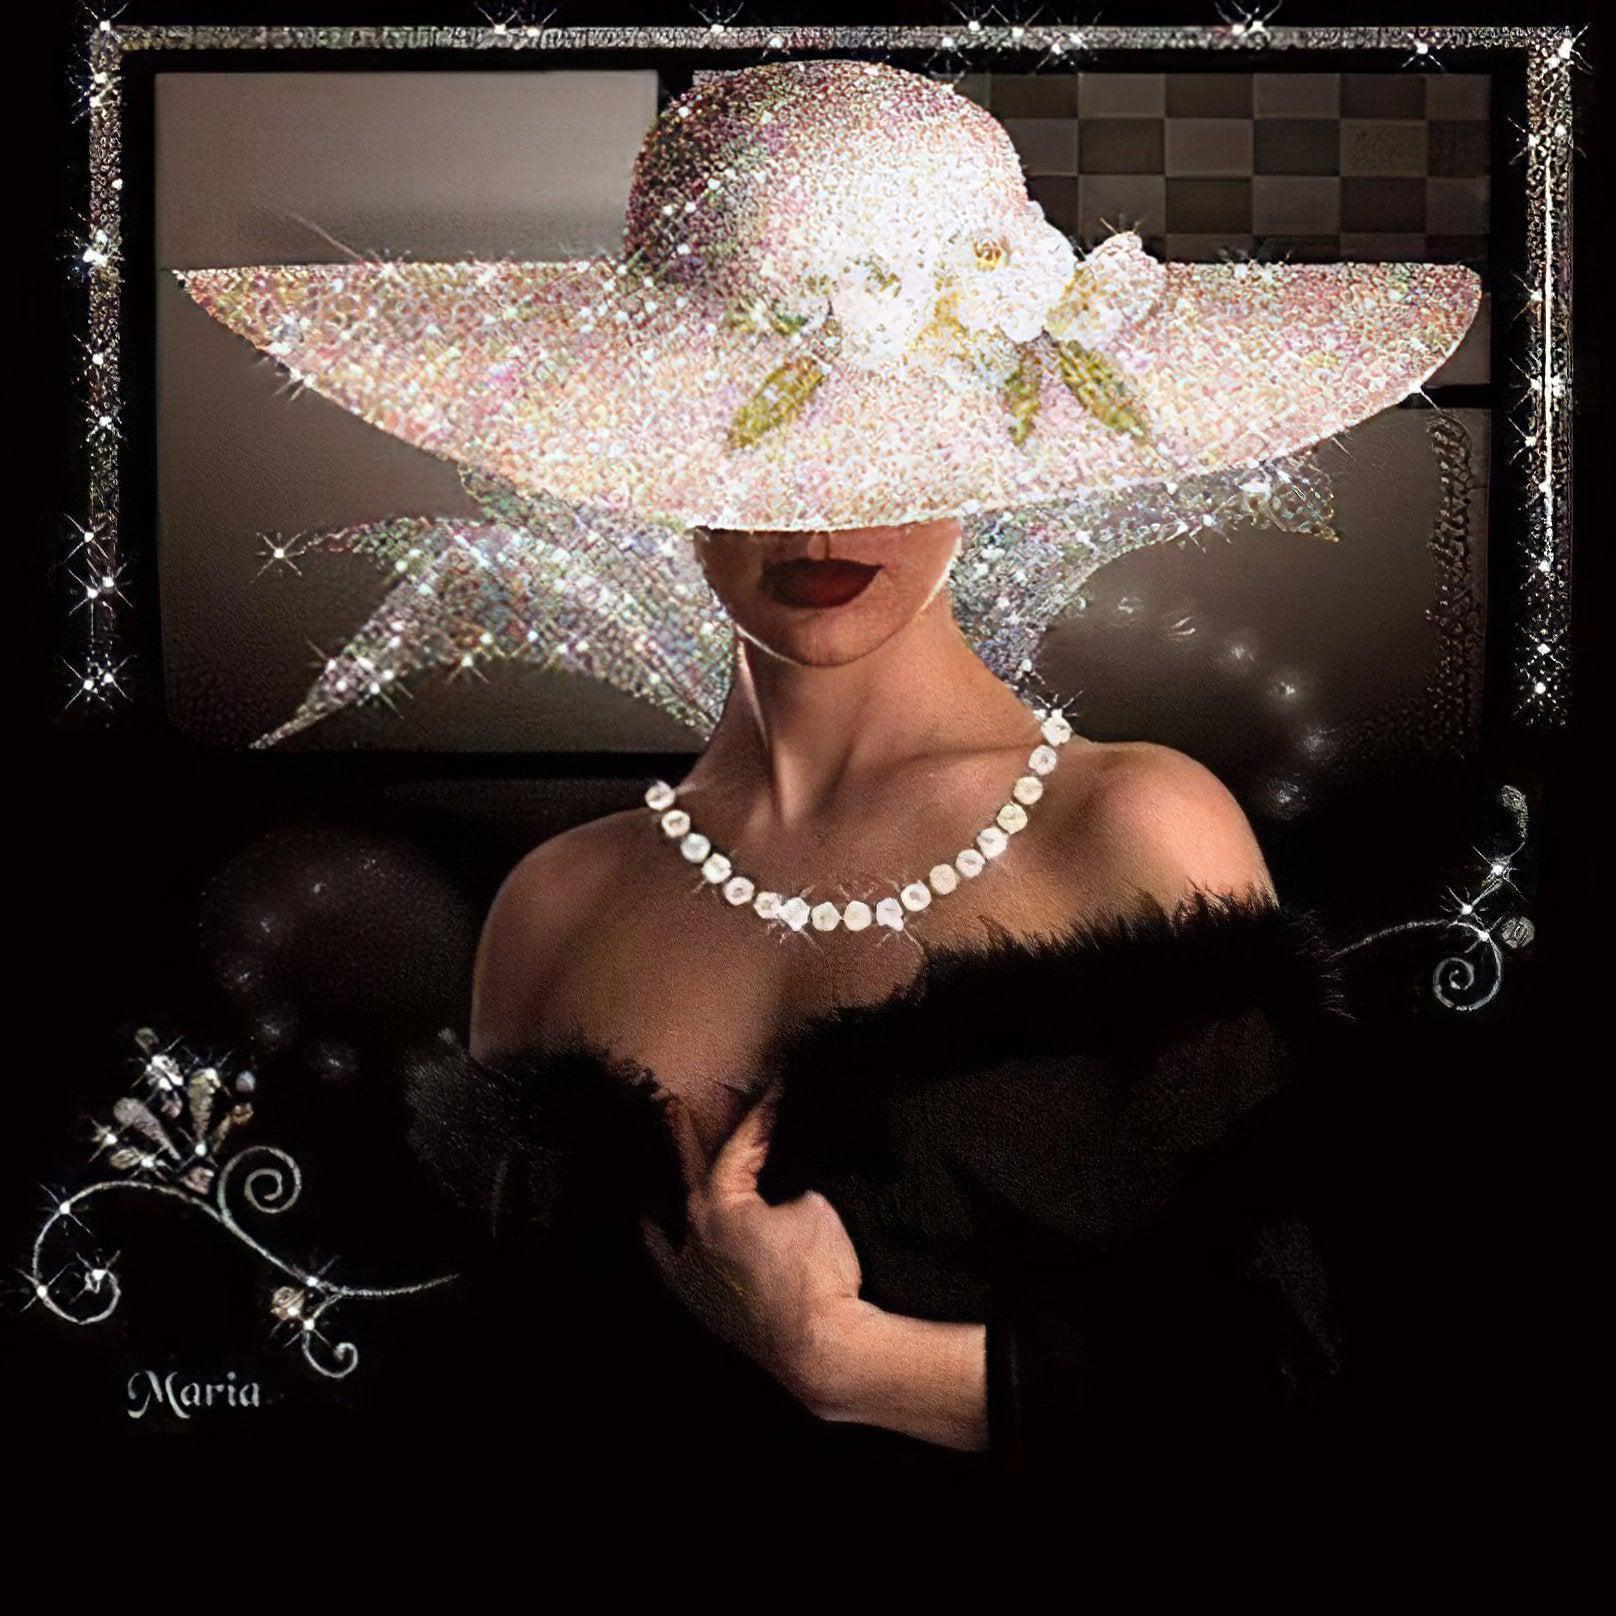 Embrace allure: Sexy Woman & Hat kit - chic and mysterious.A Sexy Woman With Her Hat - Diamondartlove